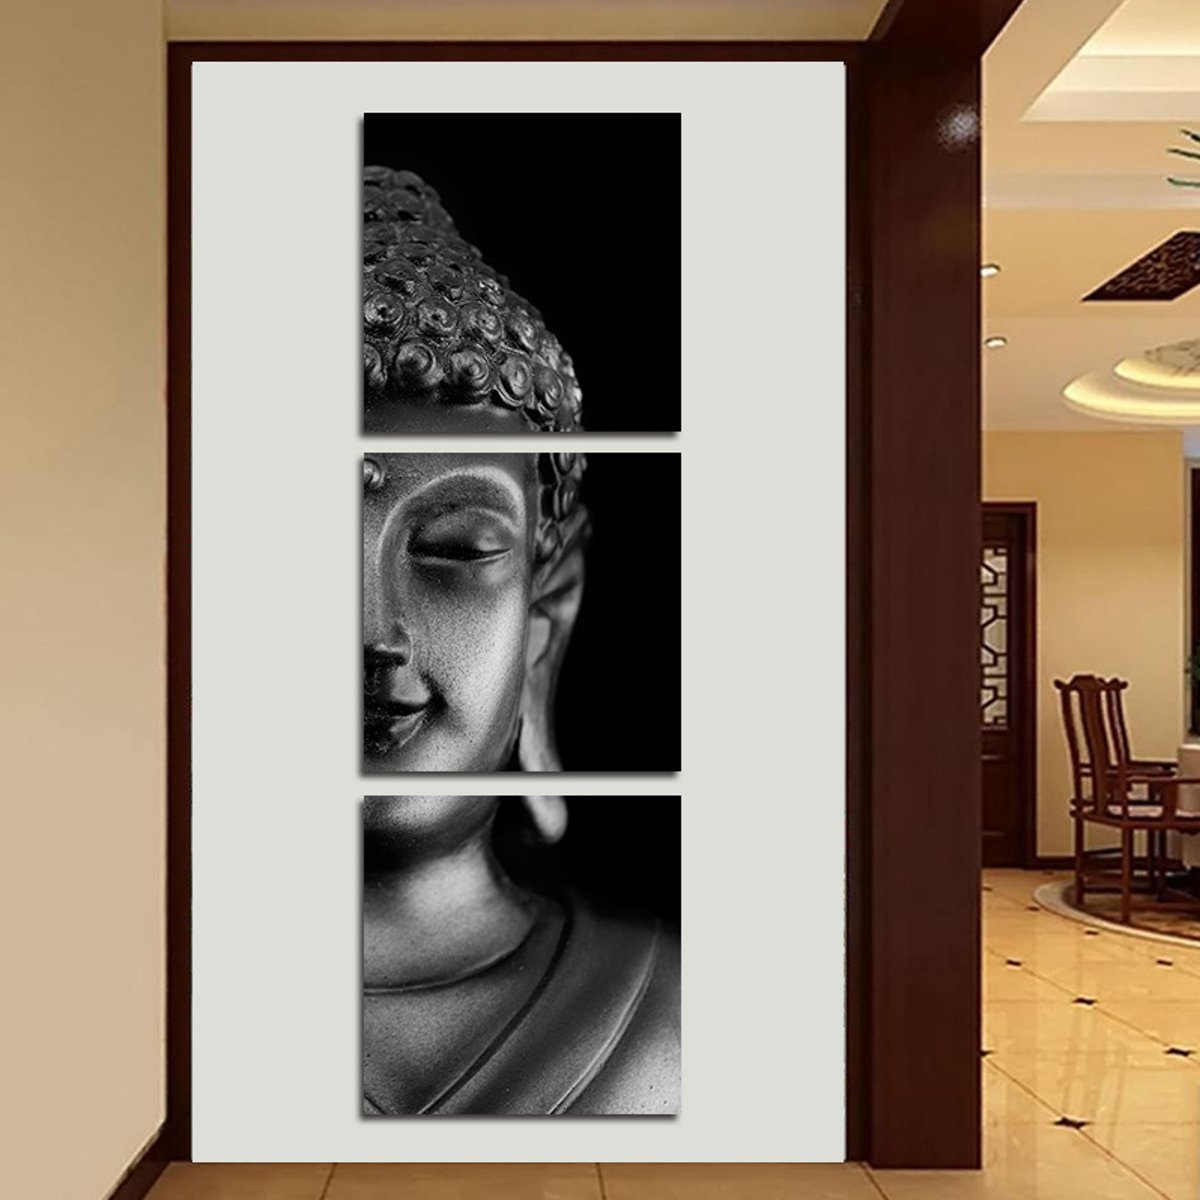 3PcsSet-Framed-Modern-Canvas-Print-Painting-Poster-Wall-Art-Picture-Home-Decorations-1488696